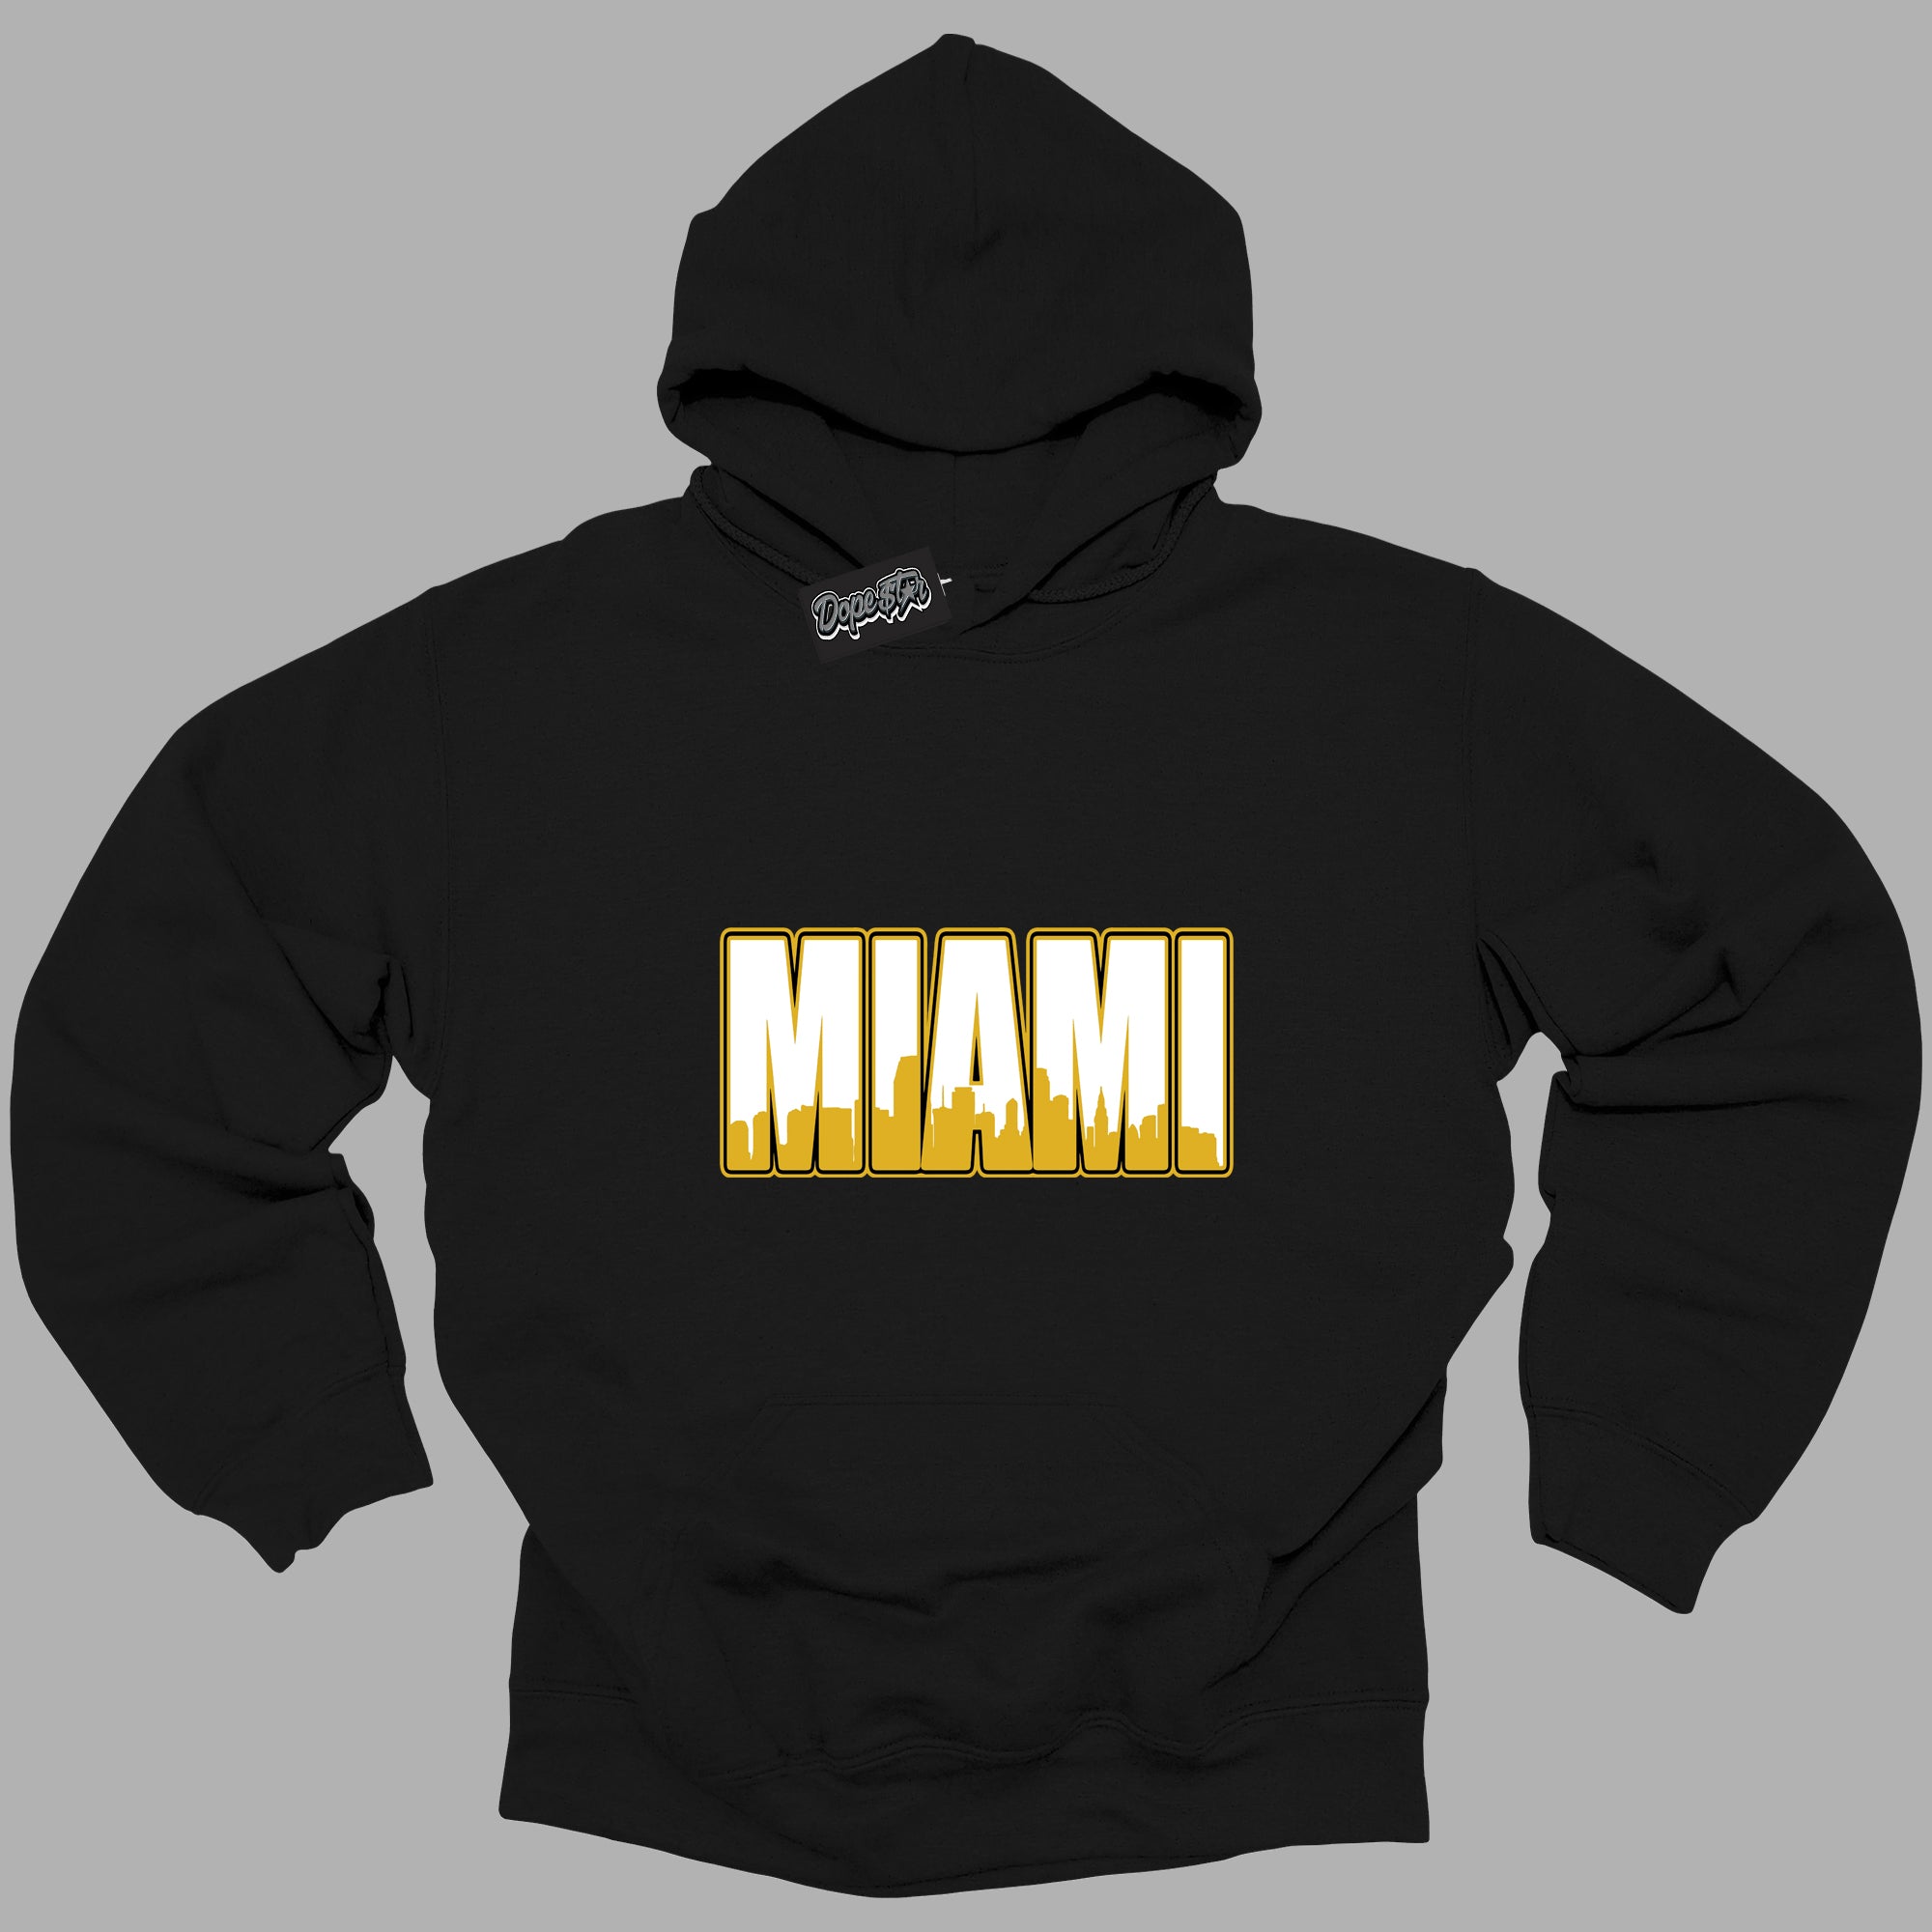 Cool Black Hoodie with “ Miami ”  design that Perfectly Matches Yellow Ochre 6s Sneakers.